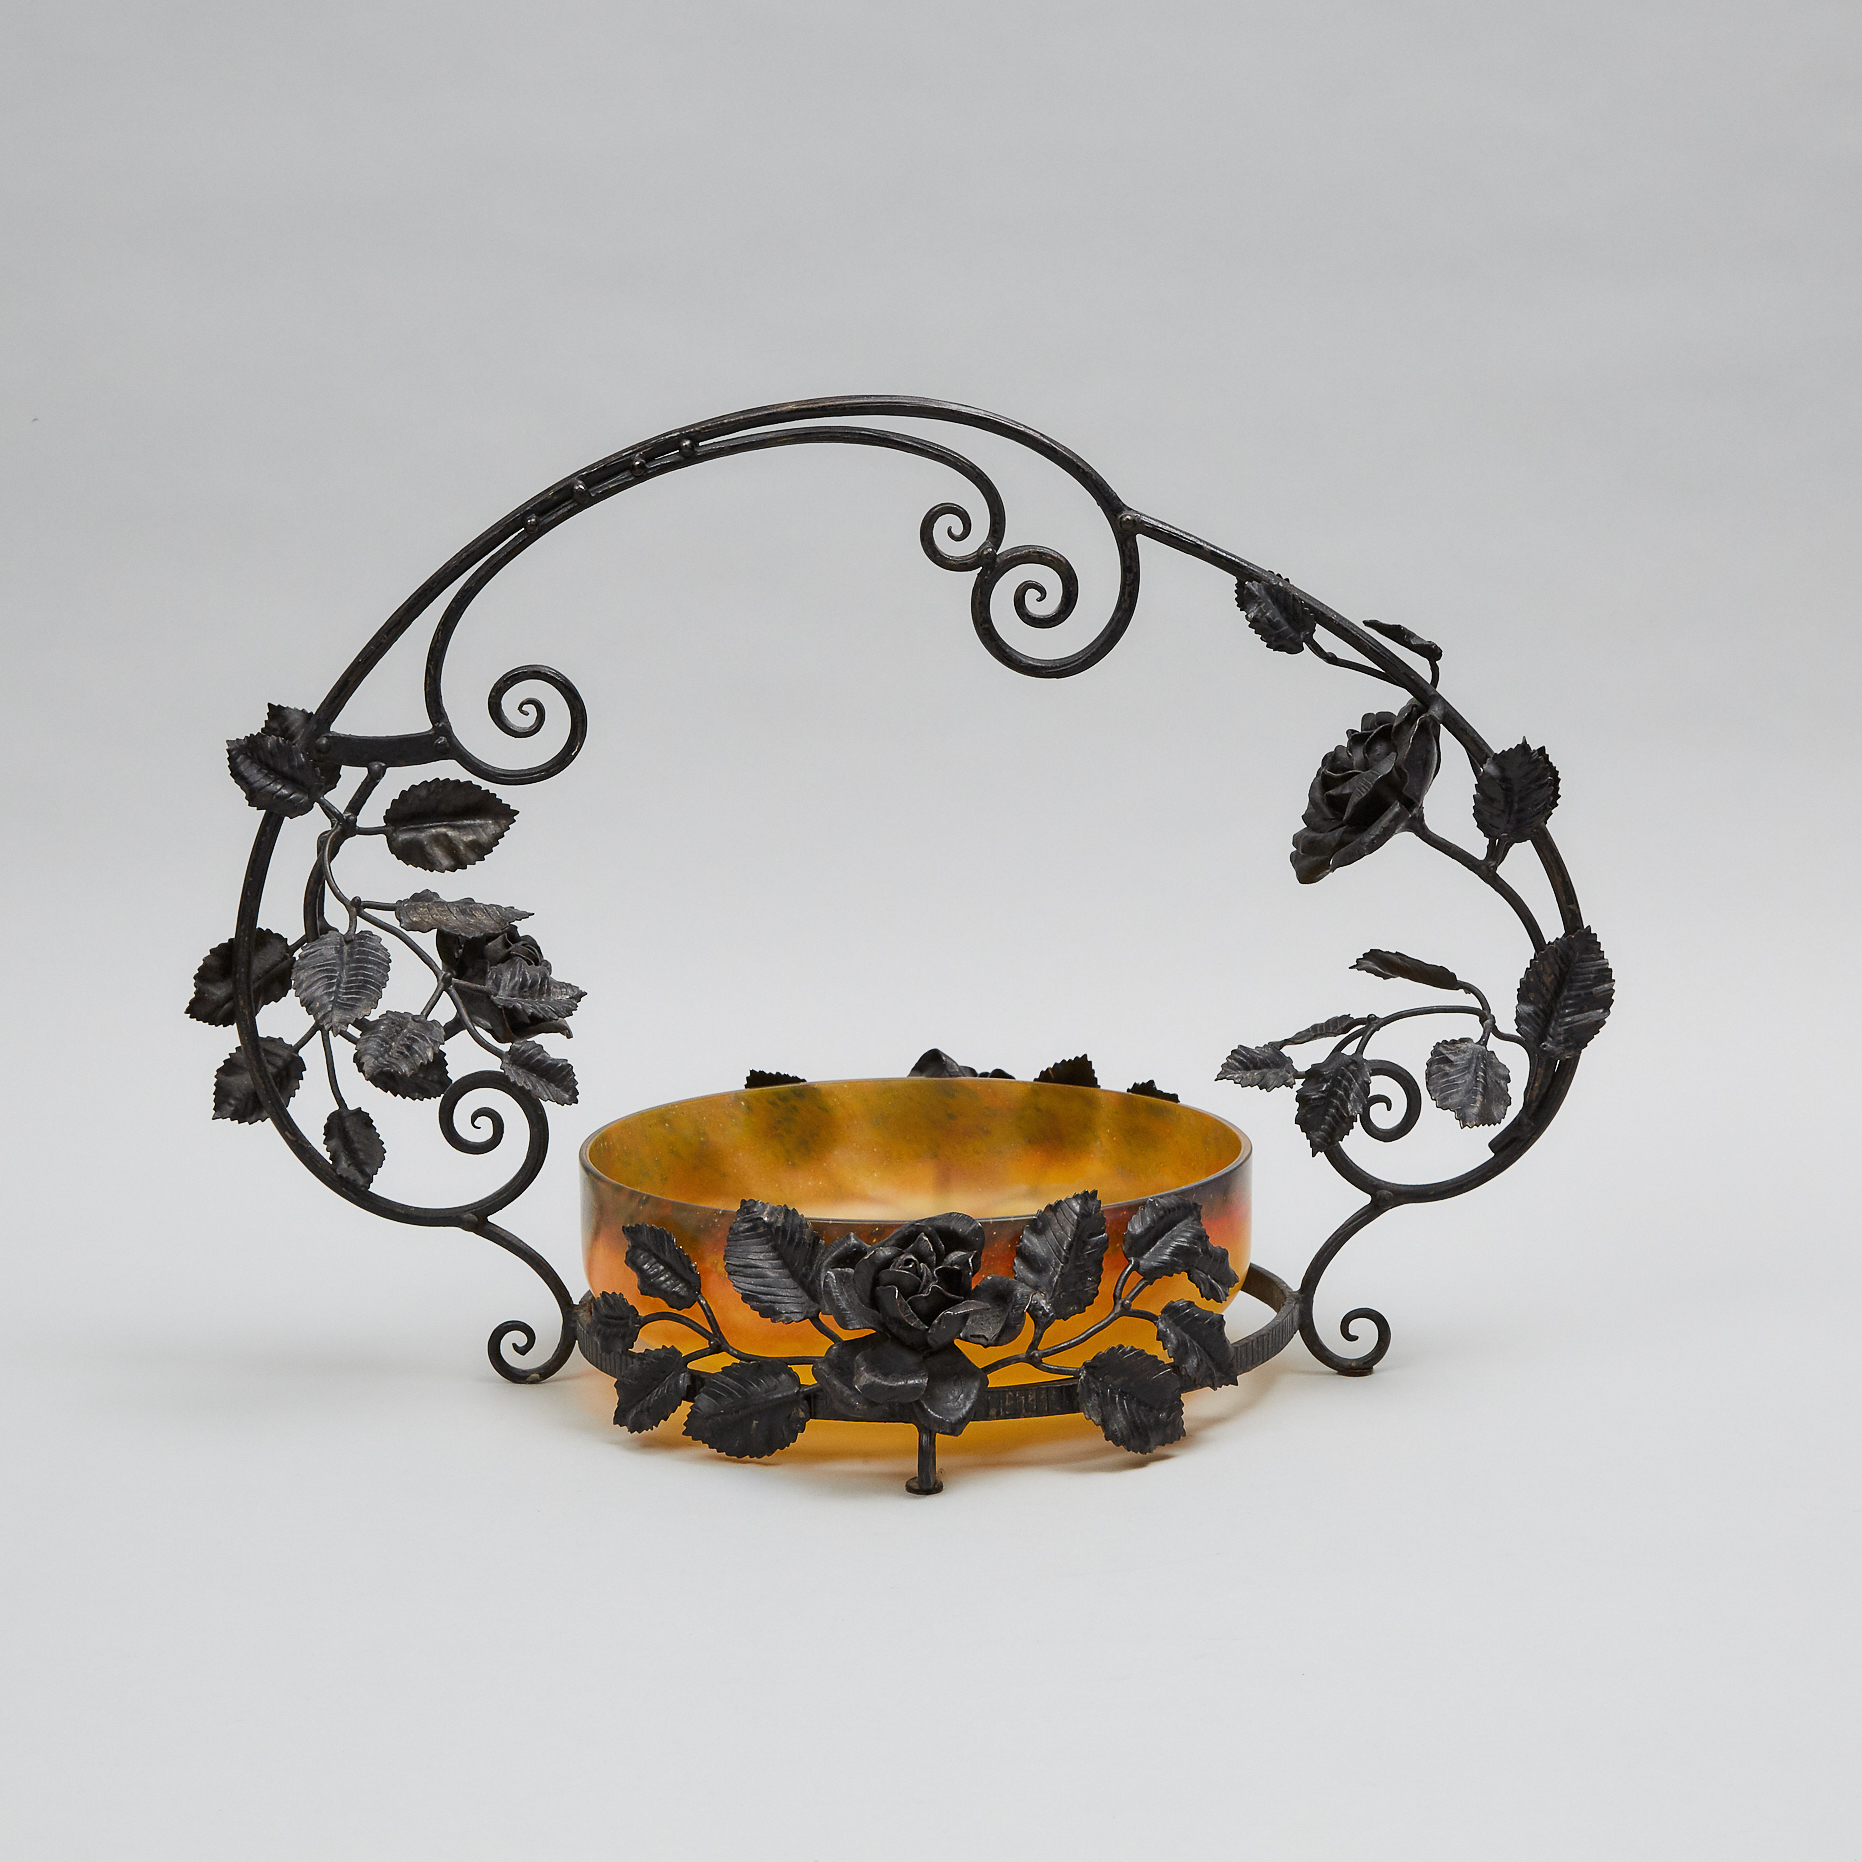 French Wrought Iron and Cased Glass Table Centrepiece, early-mid 20th century